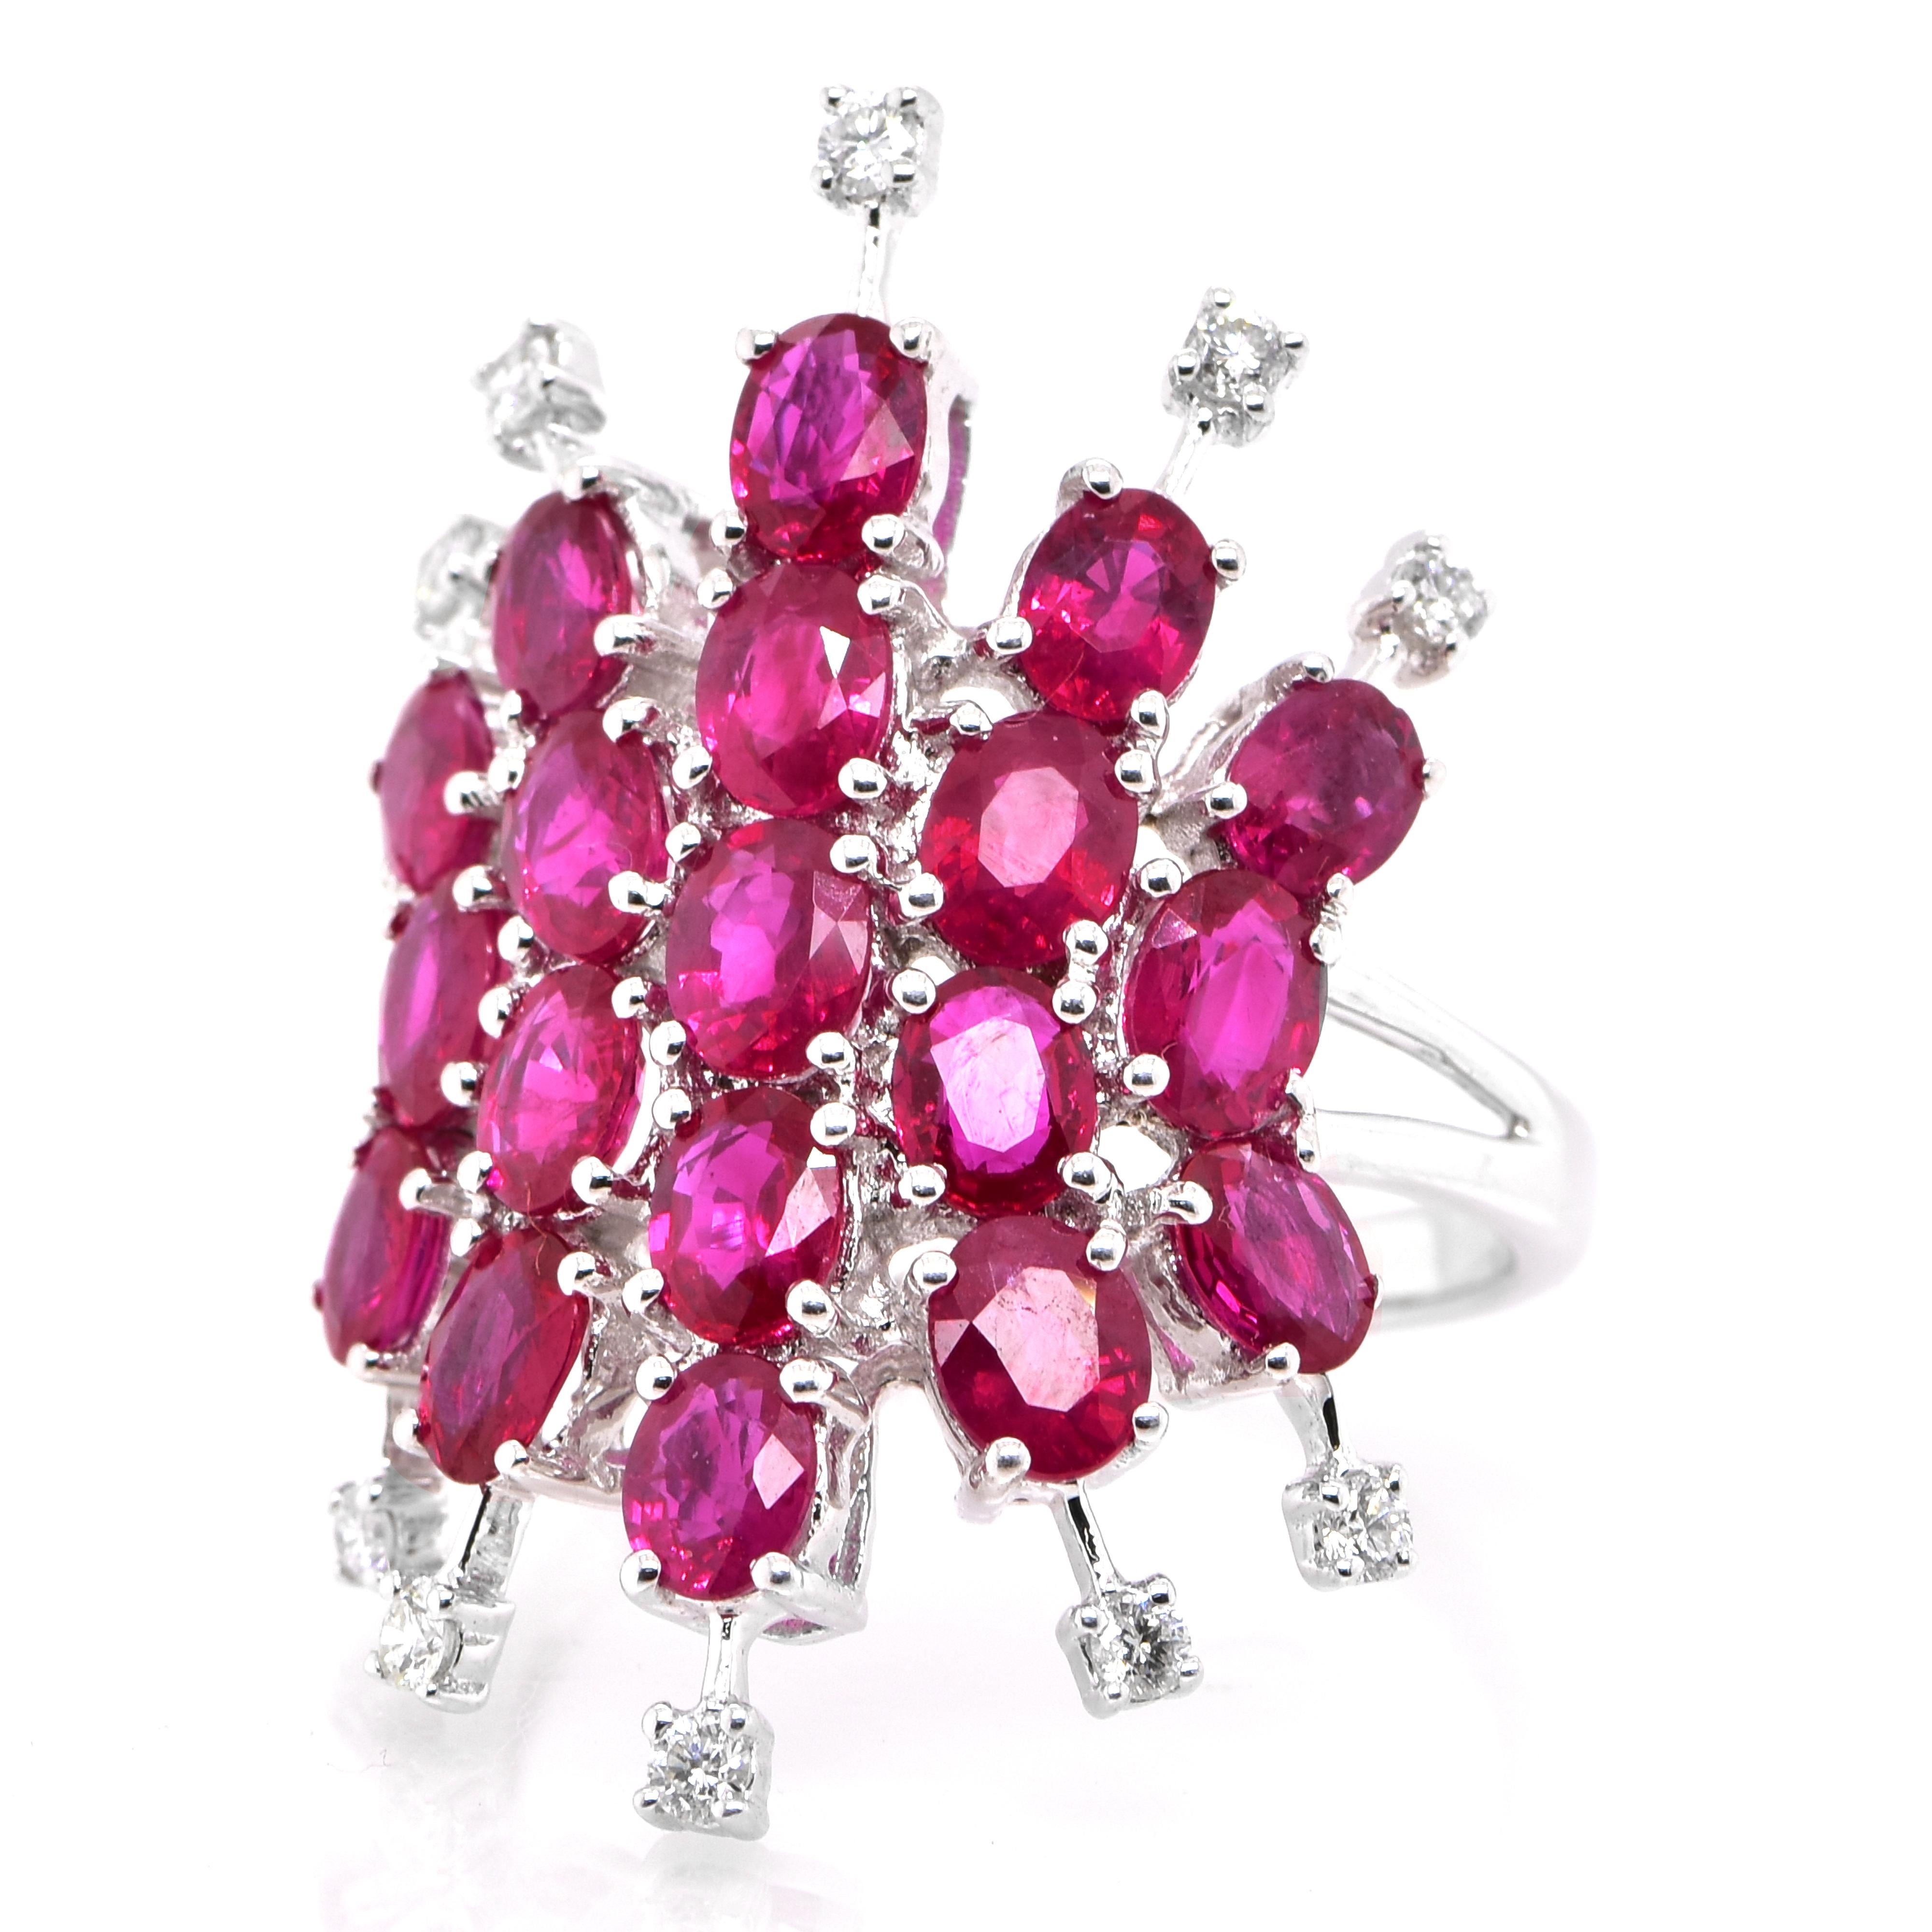 A beautiful Ring set in 18 Karat White Gold featuring 5.10 Carats of Calibrated Ruby and 0.23 Carat Diamonds. Rubies are referred to as 